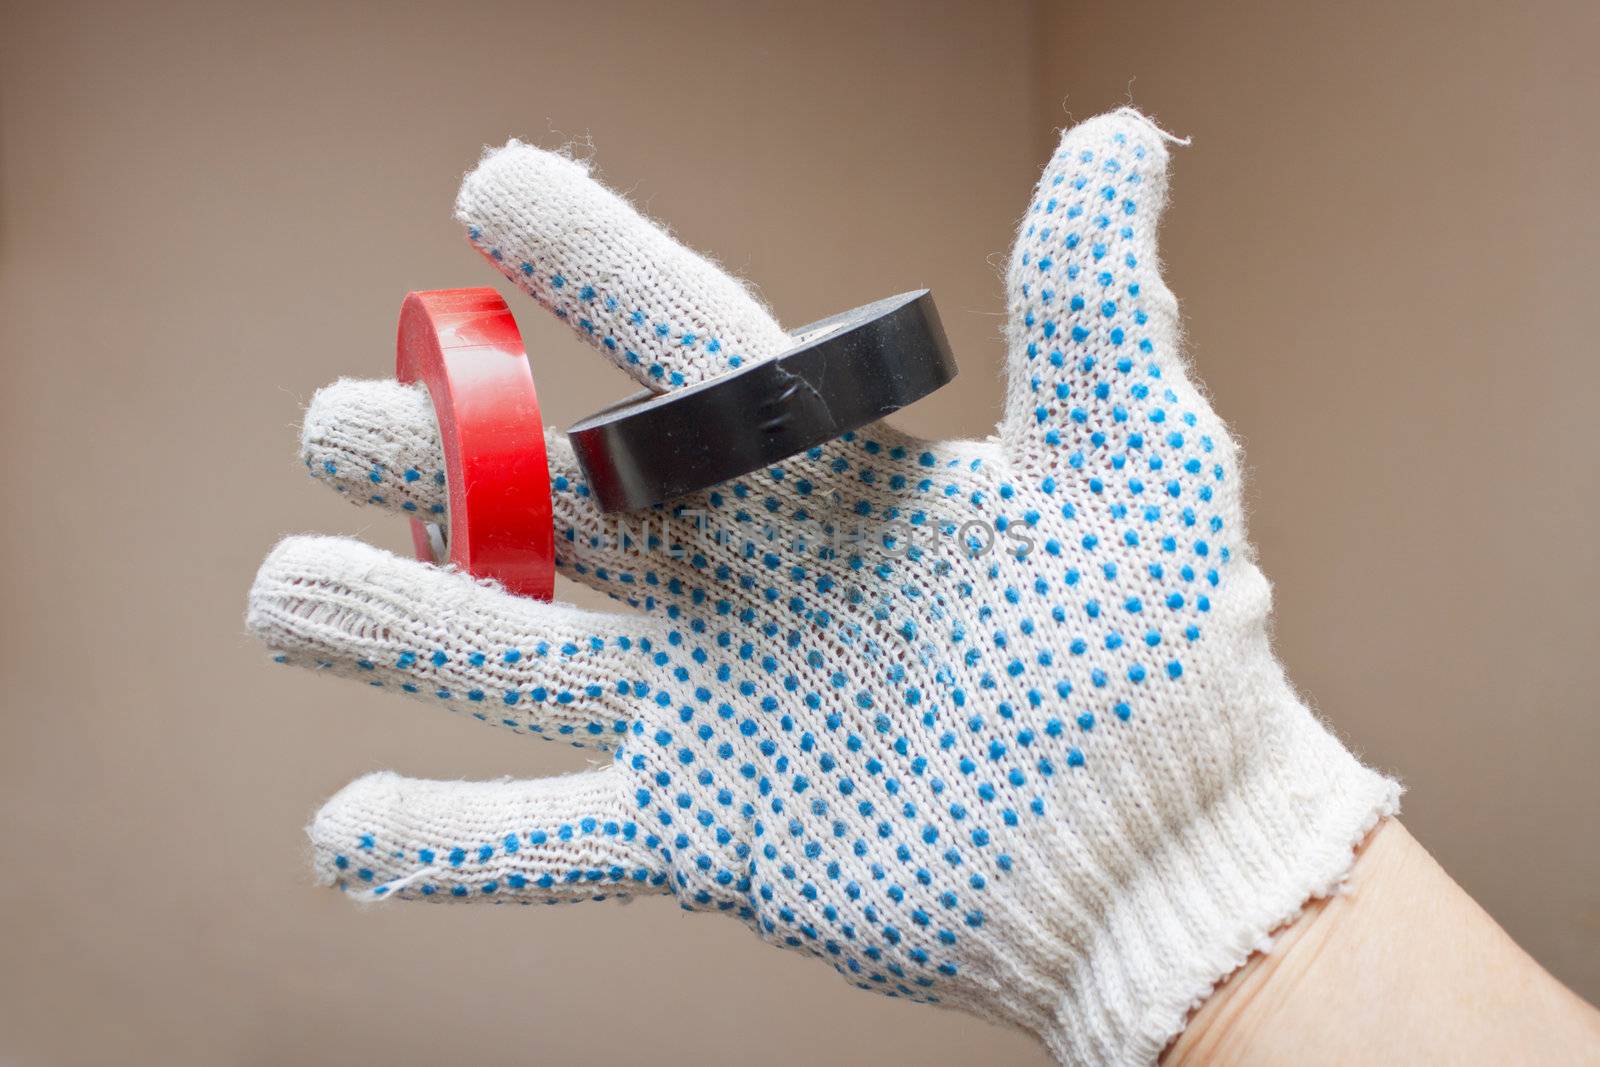 Hand in a glove and an insulating tape